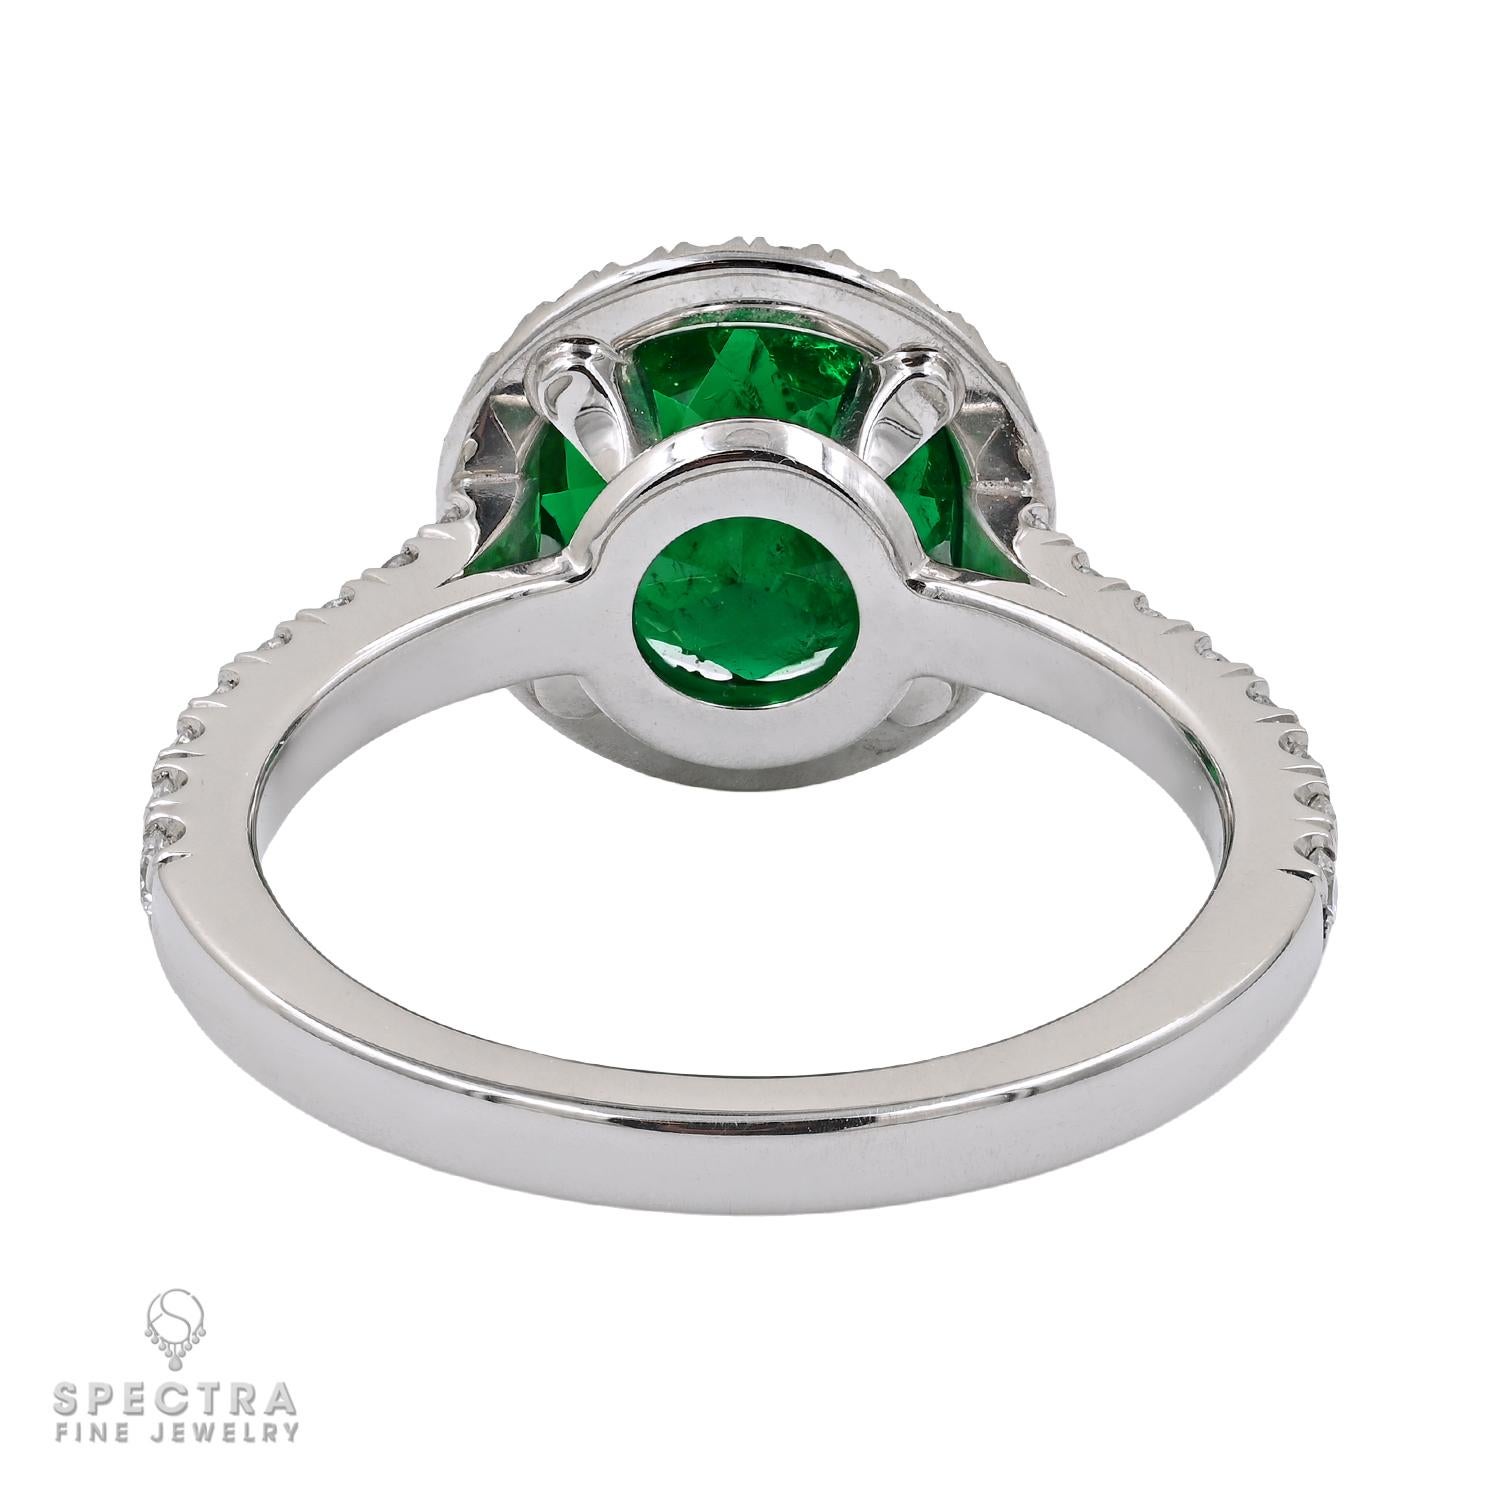 Contemporary Spectra Fine Jewelry GRS Certified 1.95 Carat Emerald Diamond Cocktail Ring For Sale